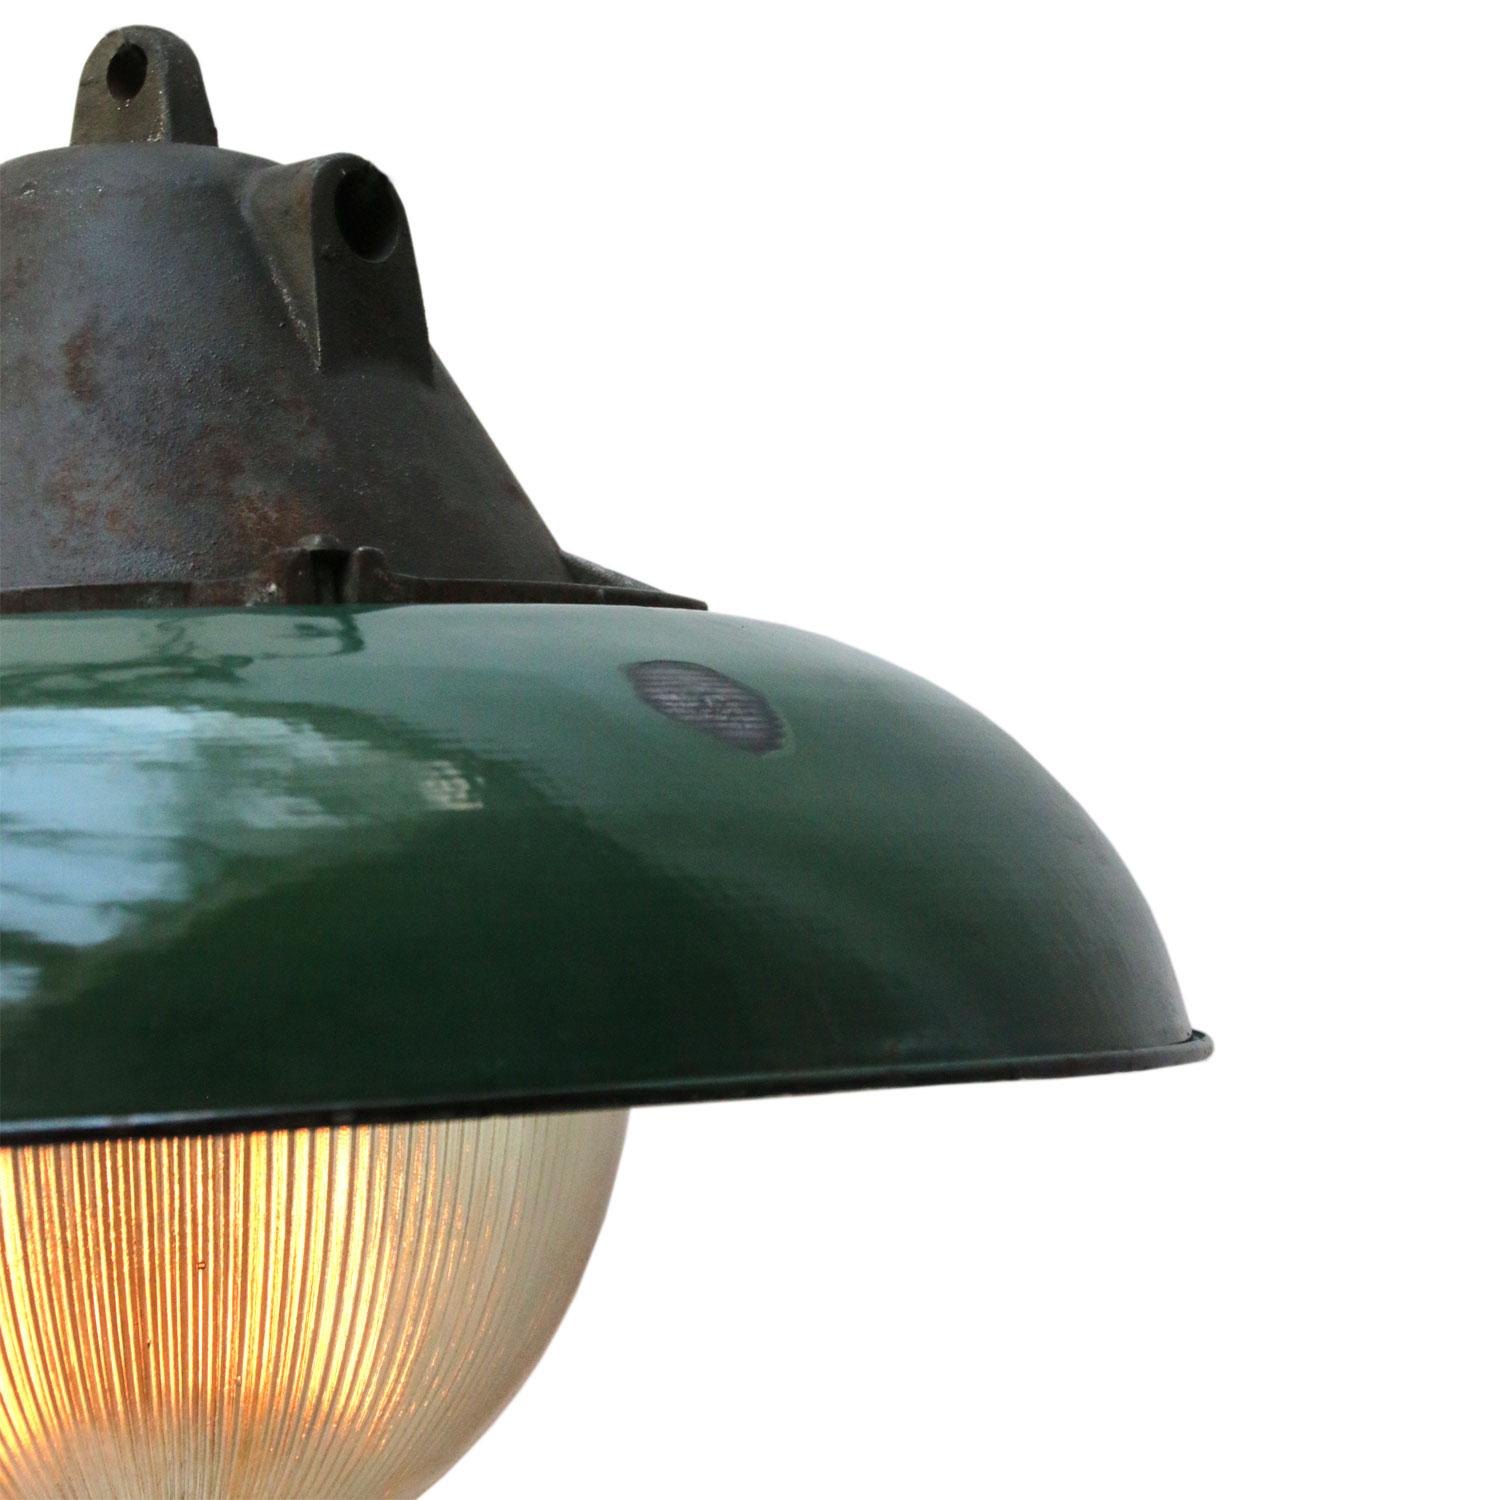 Factory pendant. Green enamel white interior. Cast iron top.
Holophane glass.

Weight: 9.0 kg / 19.8 lb

Priced individual item. All lamps have been made suitable by international standards for incandescent light bulbs, energy-efficient and LED